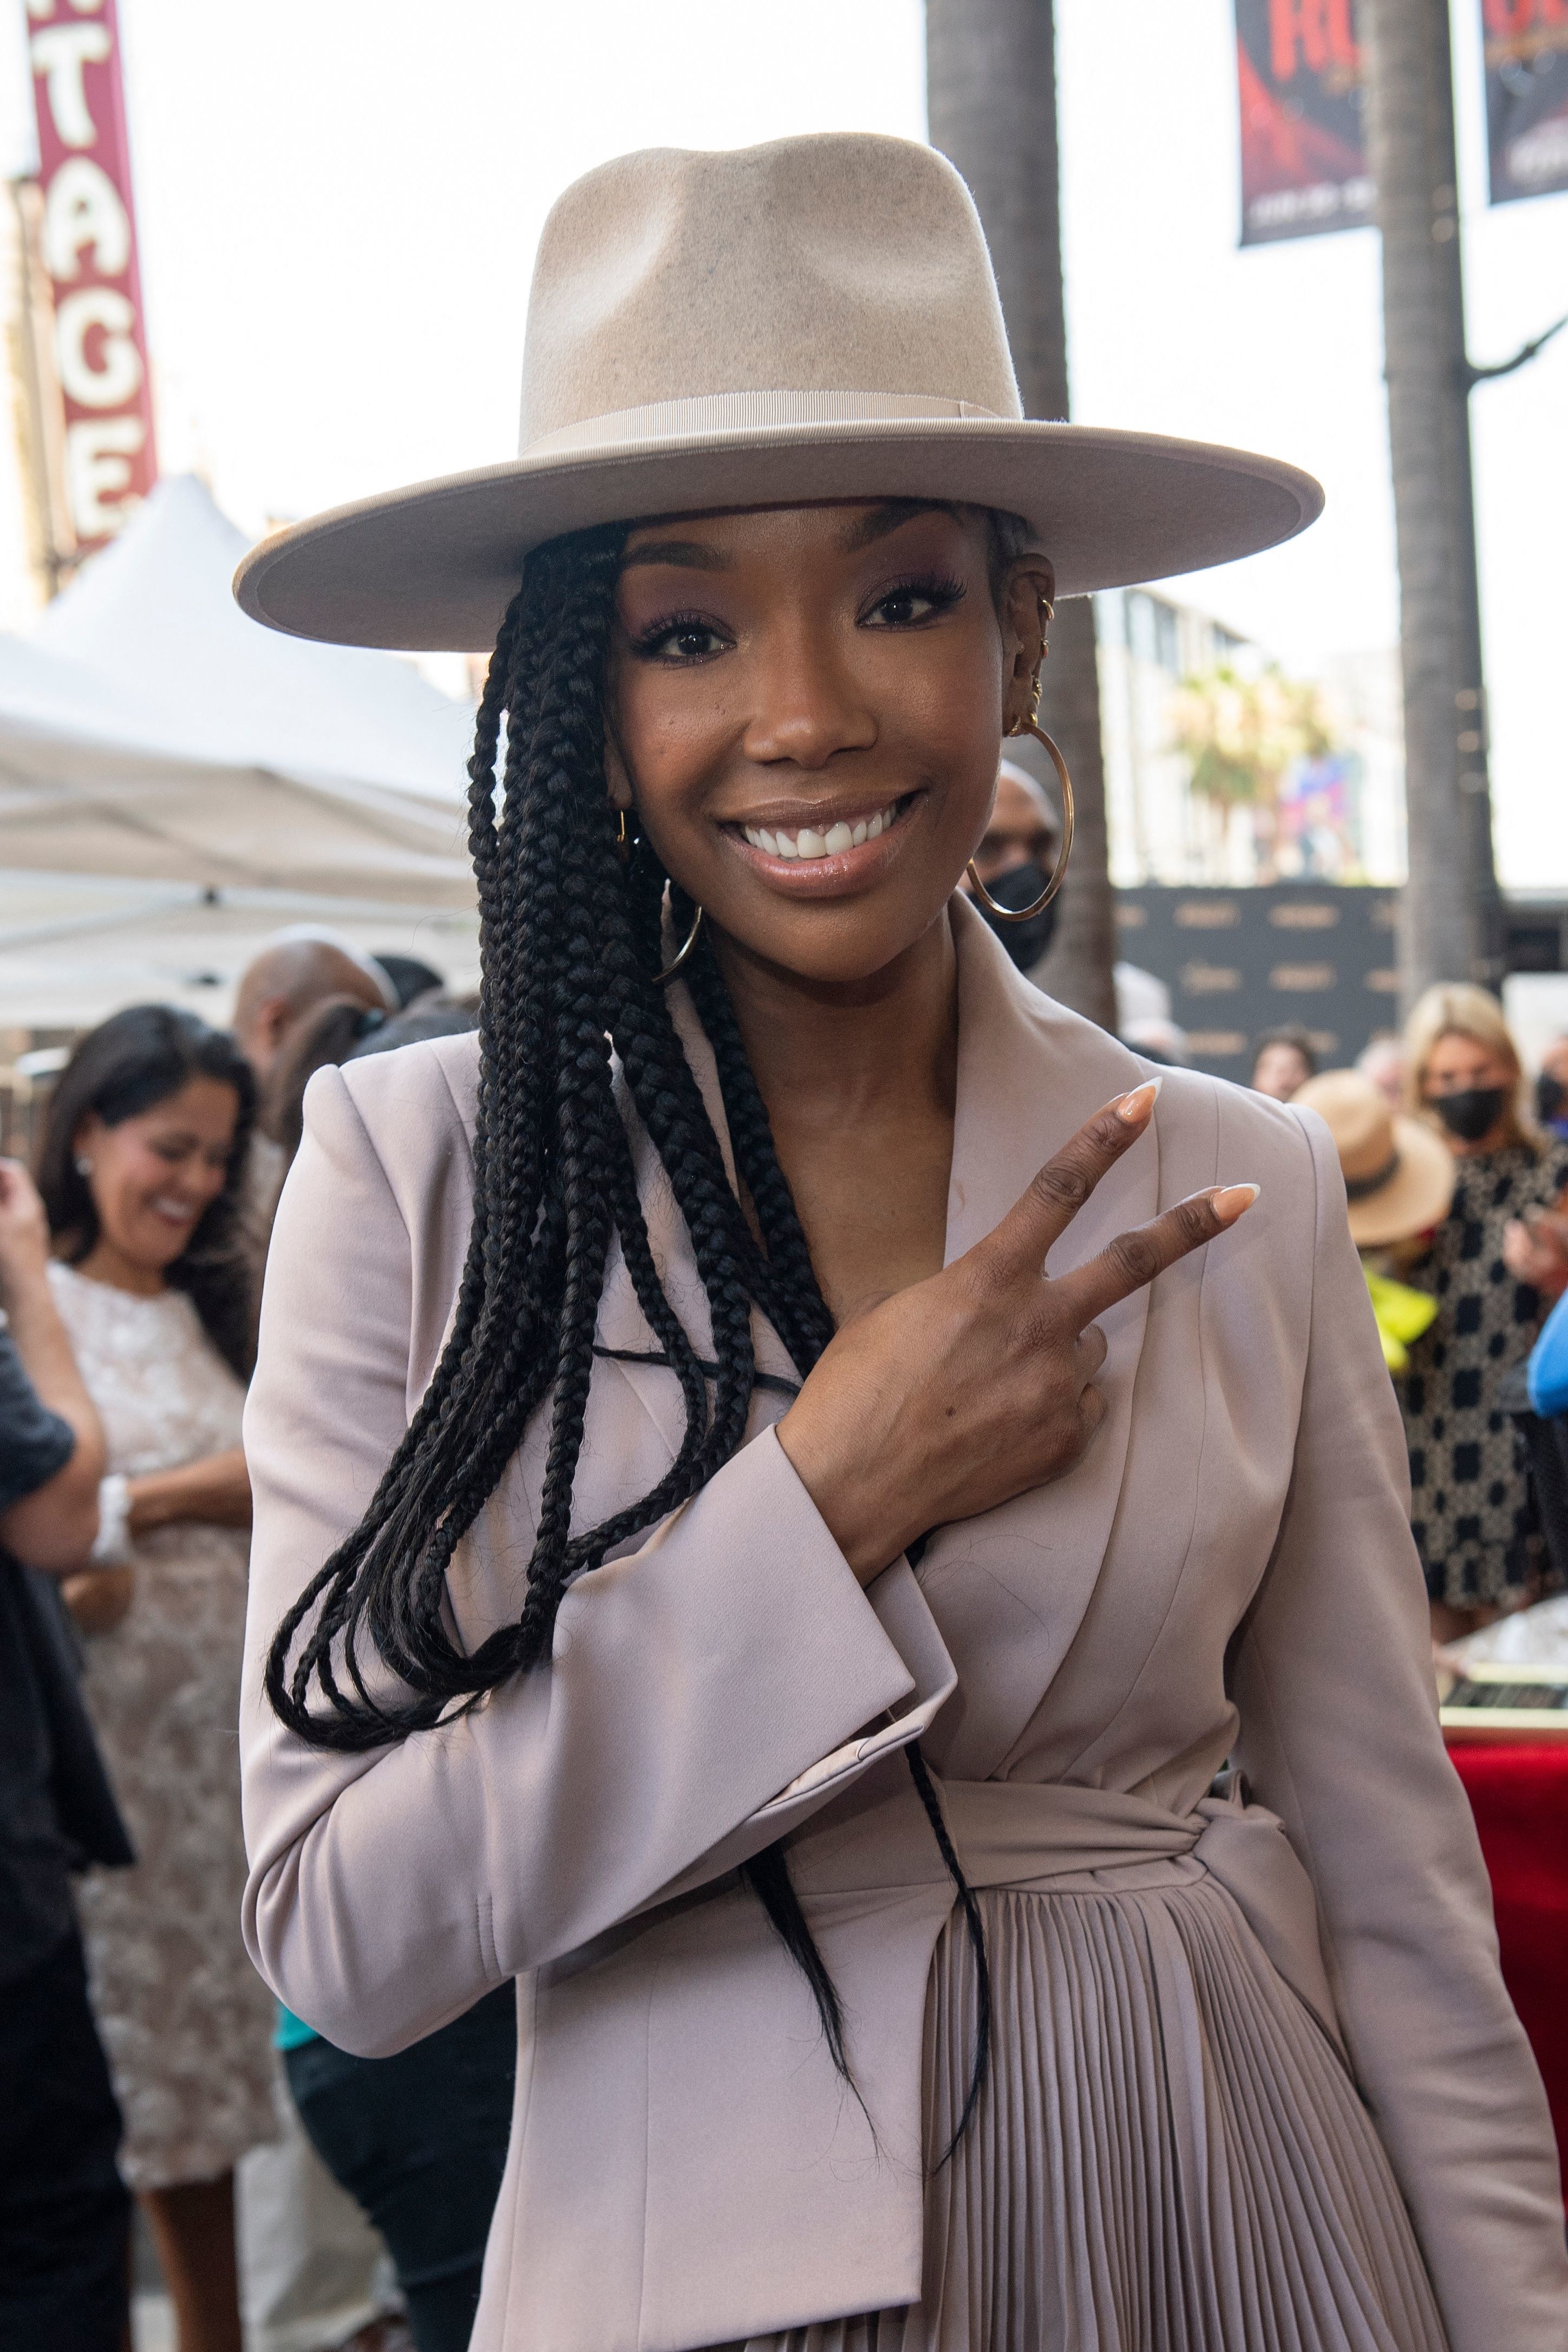 Brandy giving the peace sign